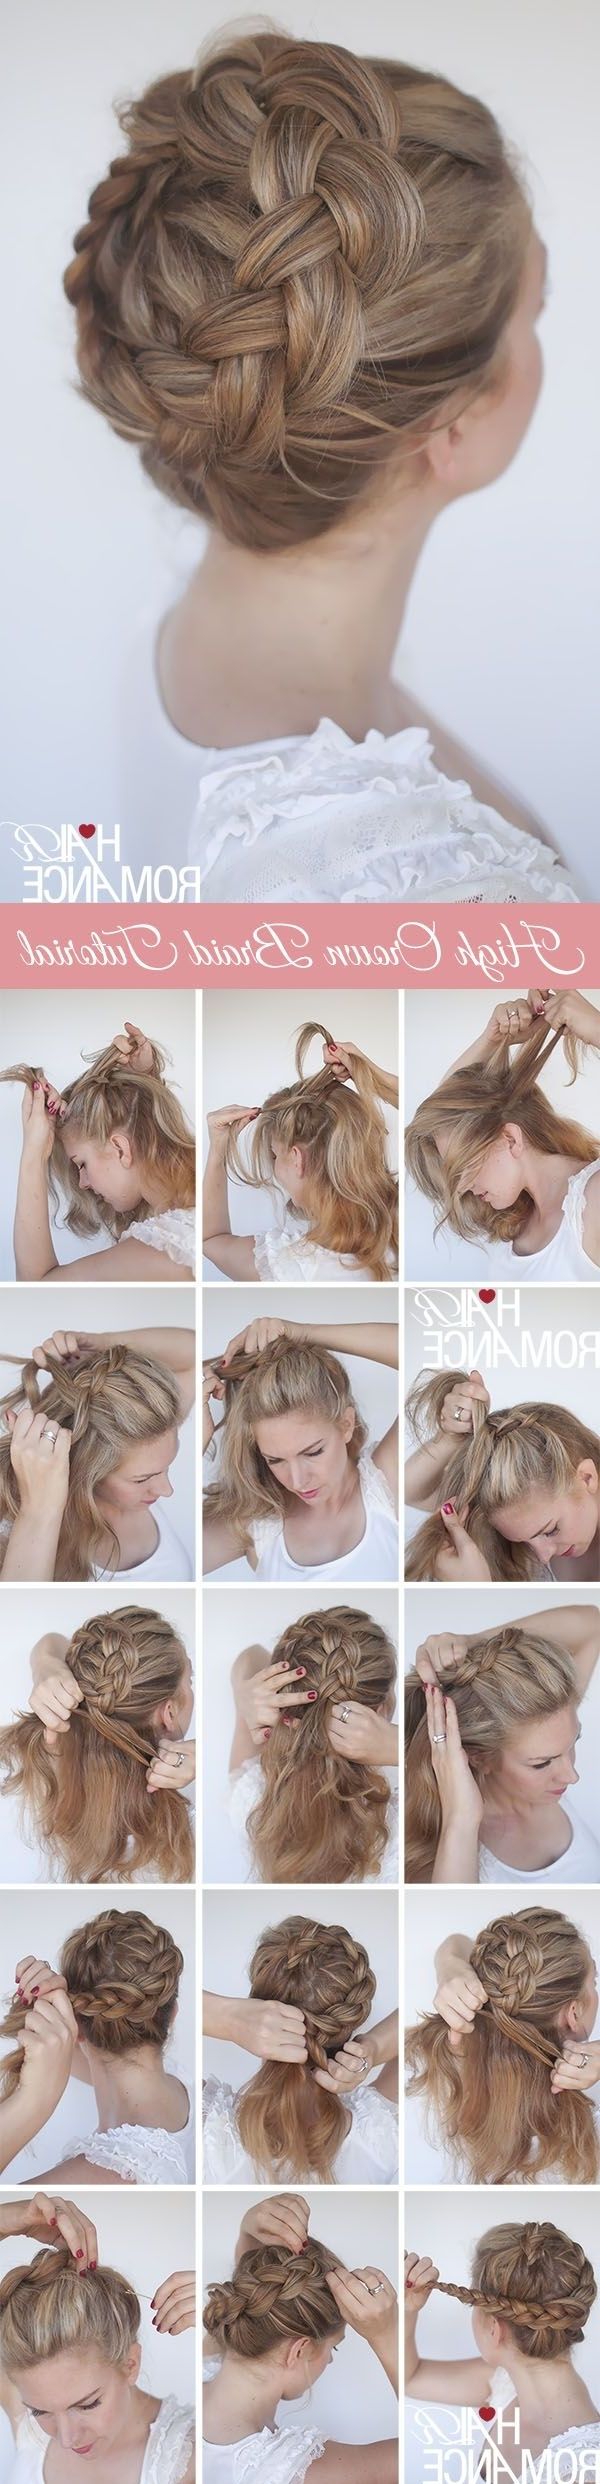 12 Pretty Braided Crown Hairstyle Tutorials And Ideas – Pretty Designs With Regard To Braided Crown Updo Hairstyles (View 13 of 15)